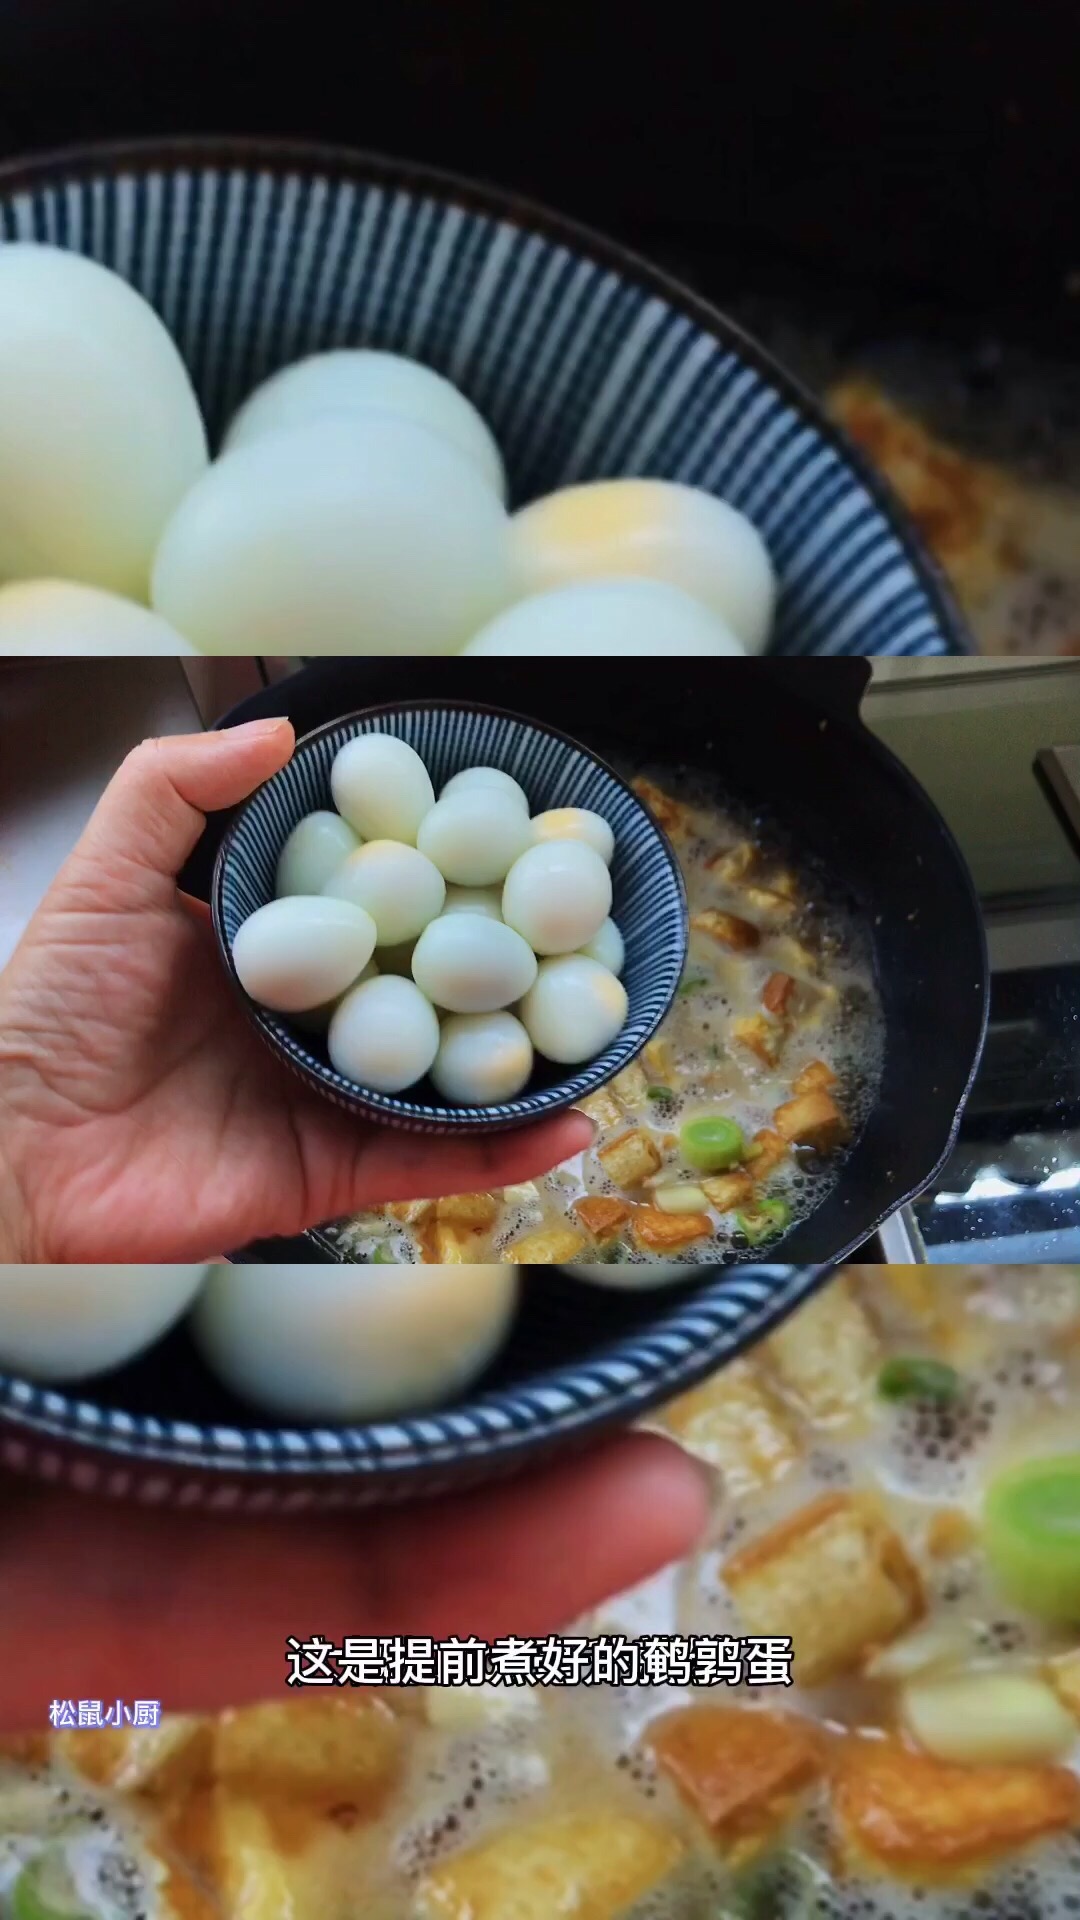 Braised Tofu with Beer and Quail Eggs recipe